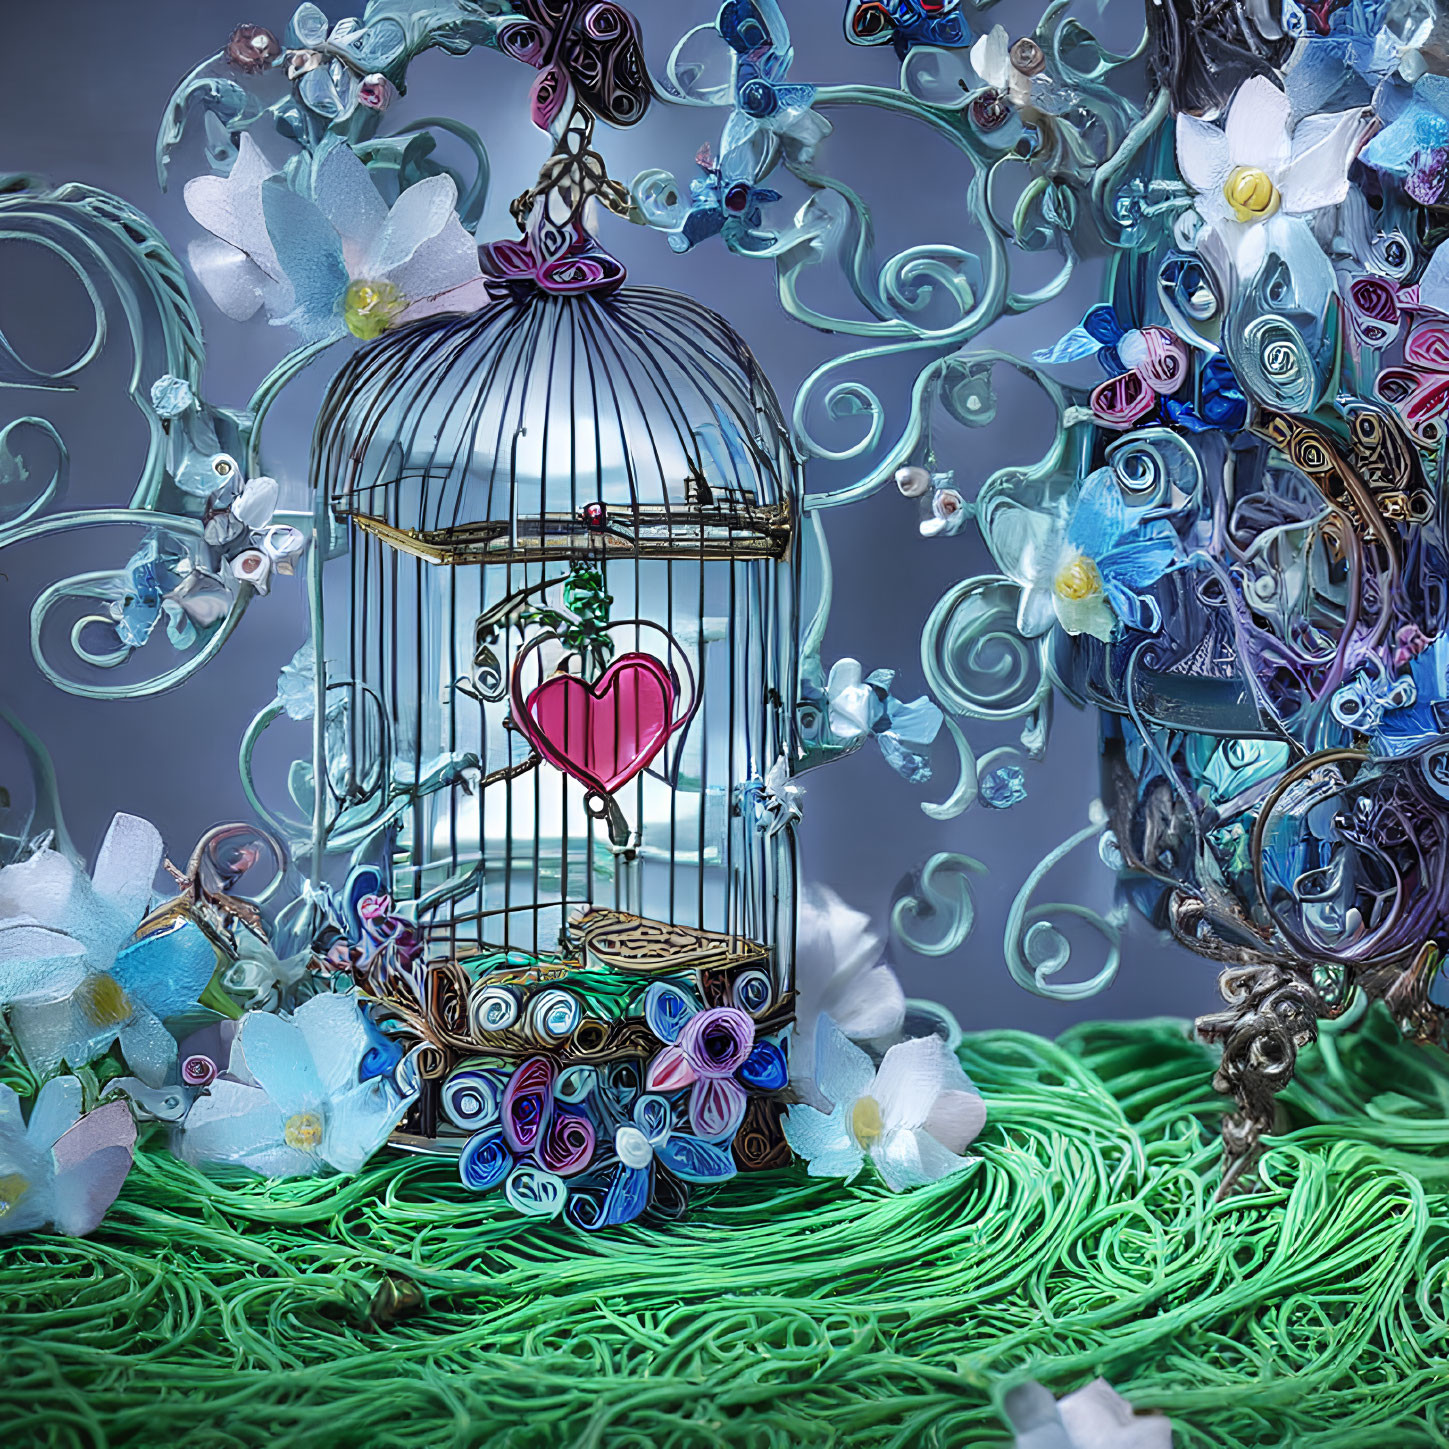 Colorful birdcage with heart, floral quilled paper designs on textured backdrop